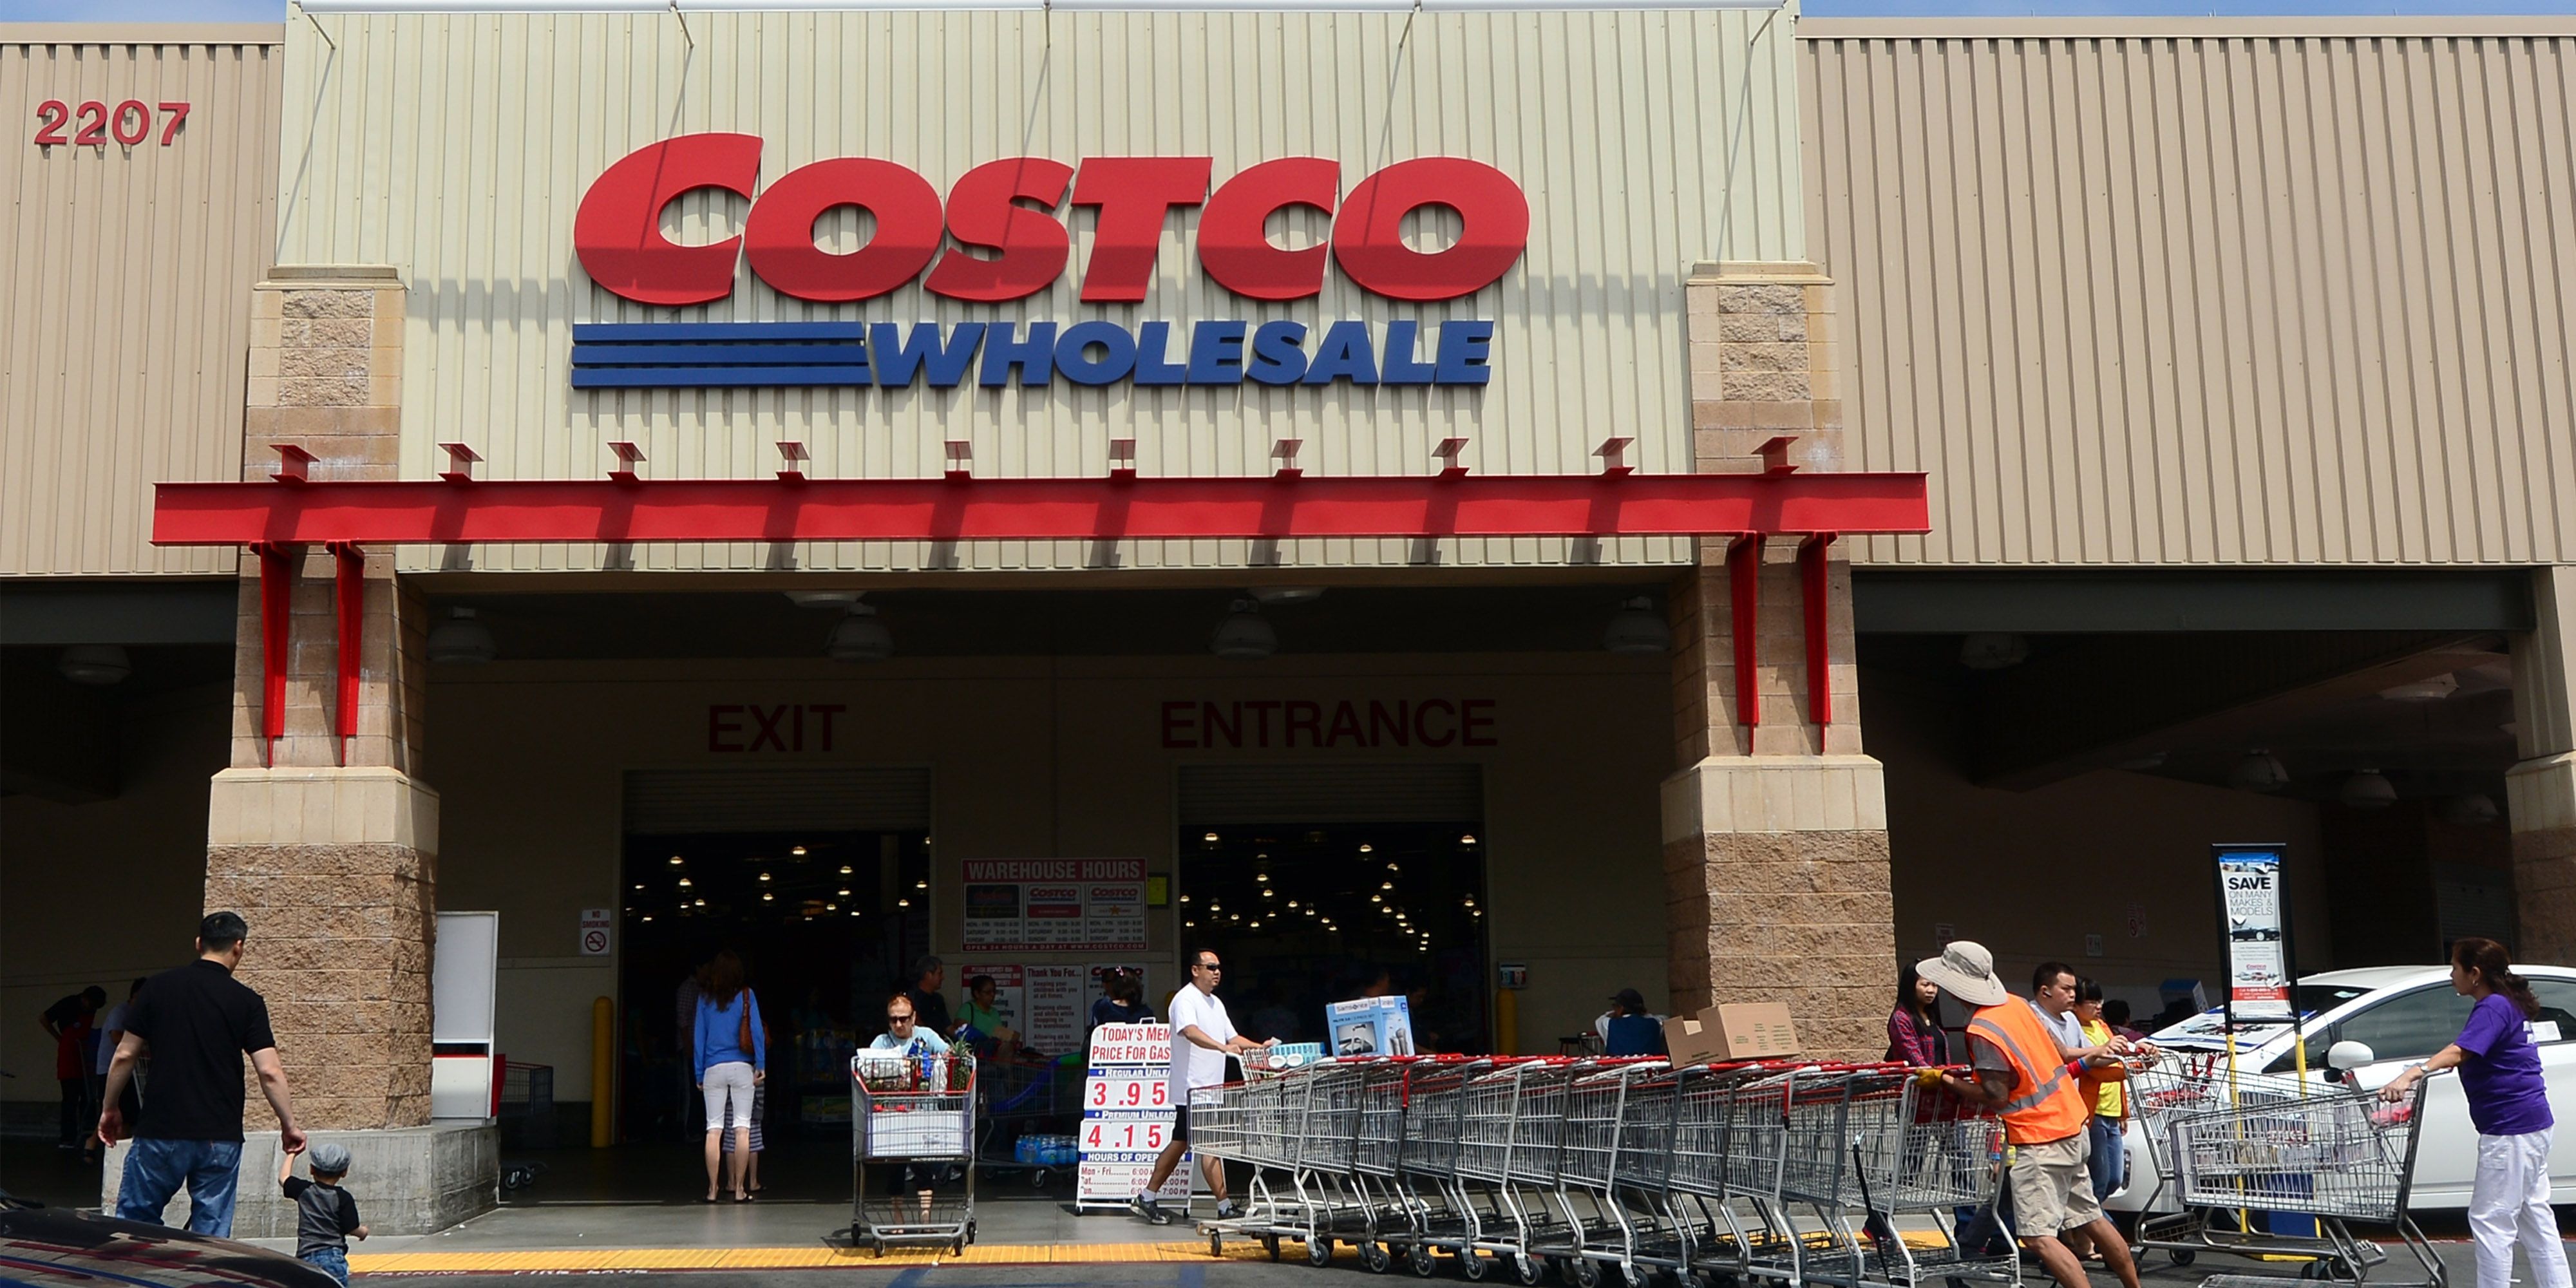 Costco Is Hosting Sensory-Friendly Shopping Hours For People With Autism